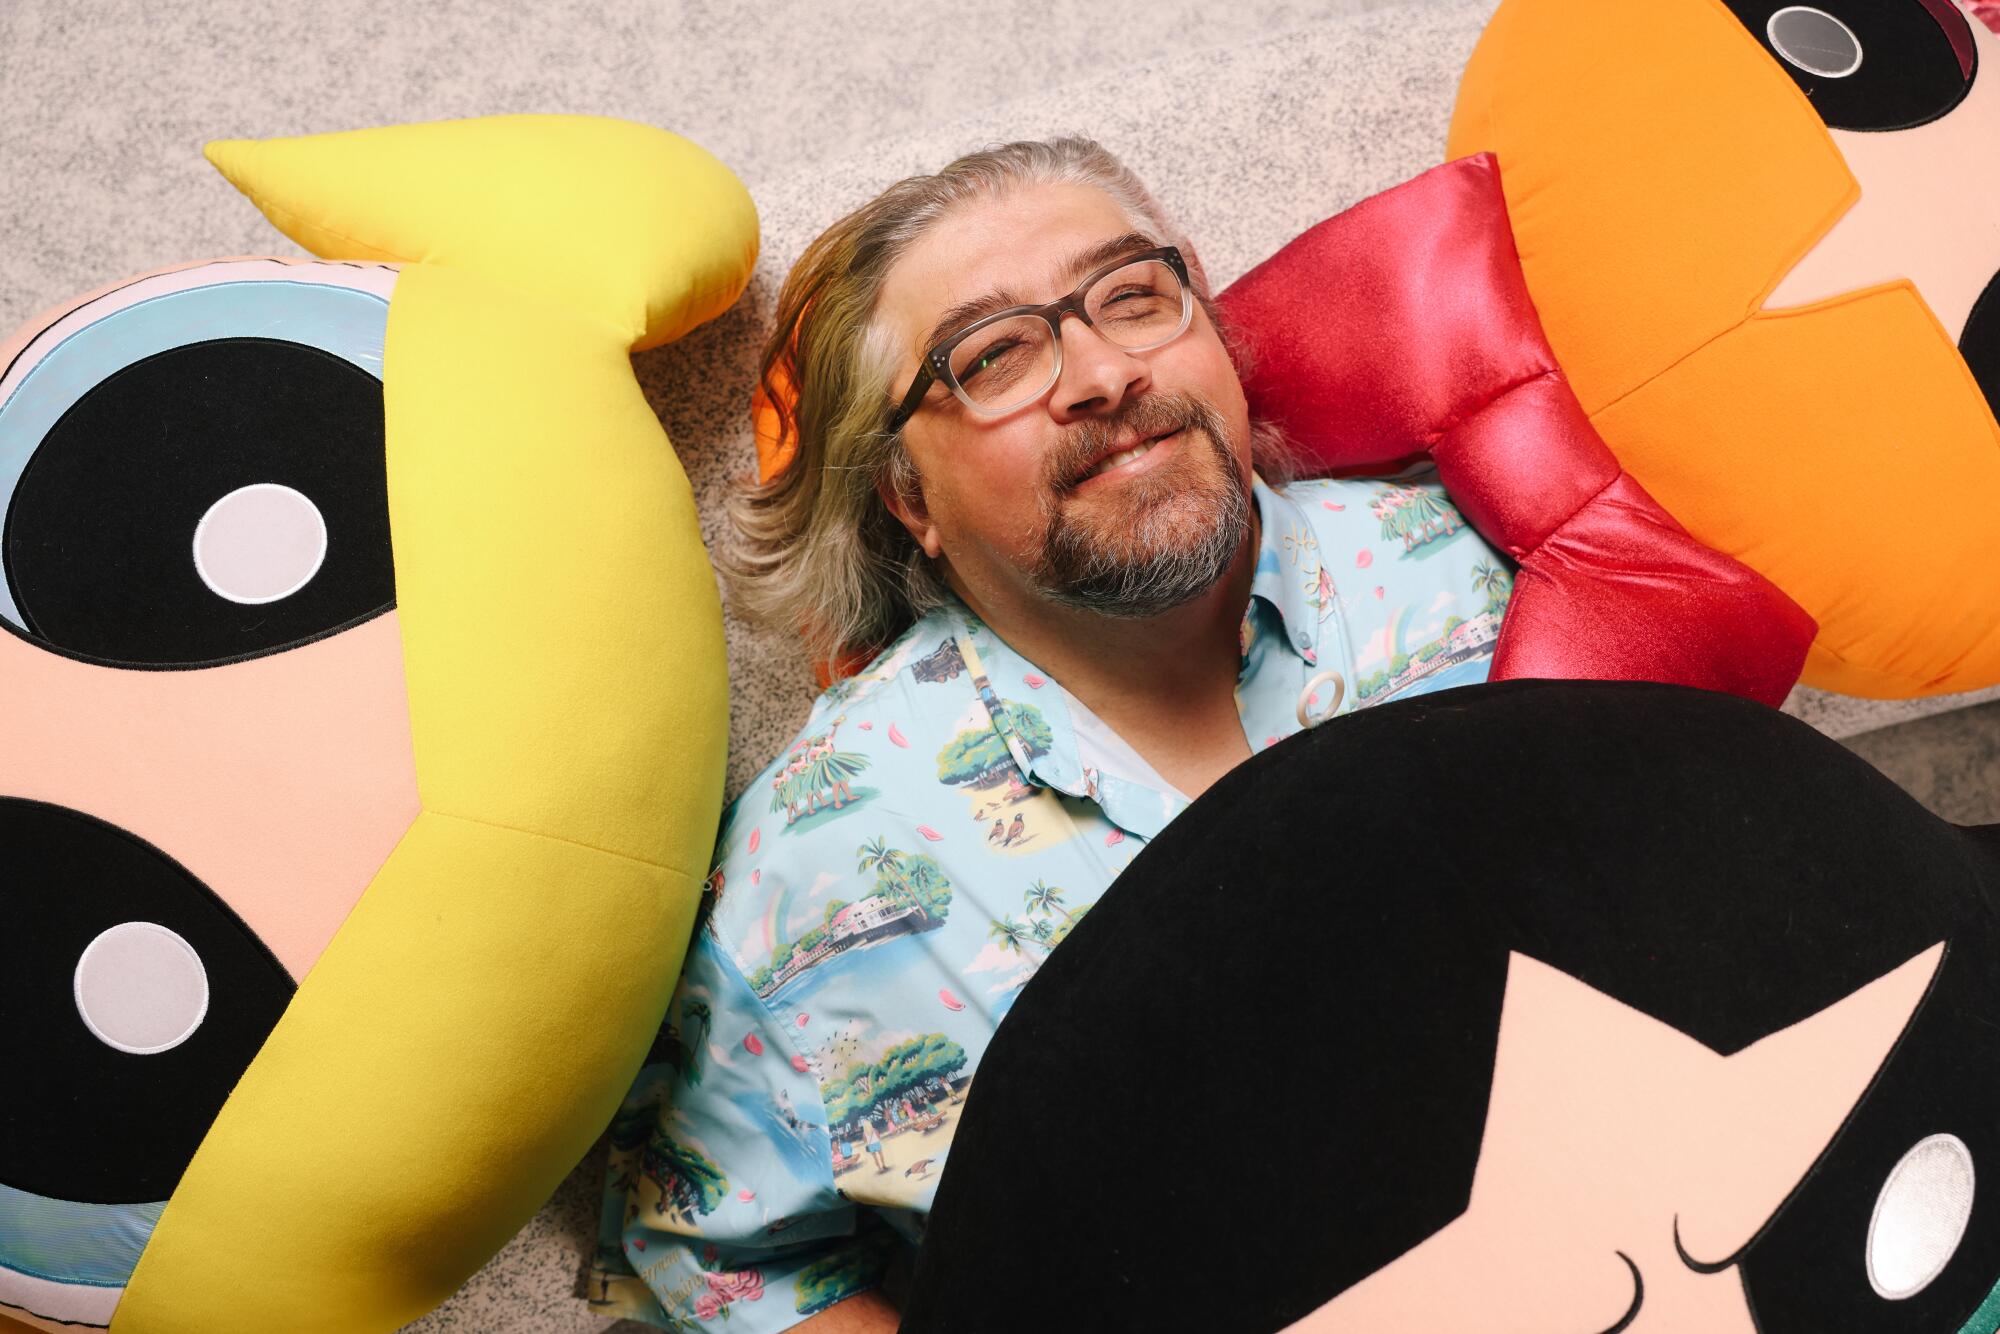 Craig McCracken surrounded by giant plushes of Bubbles, Blossom and Buttercup.